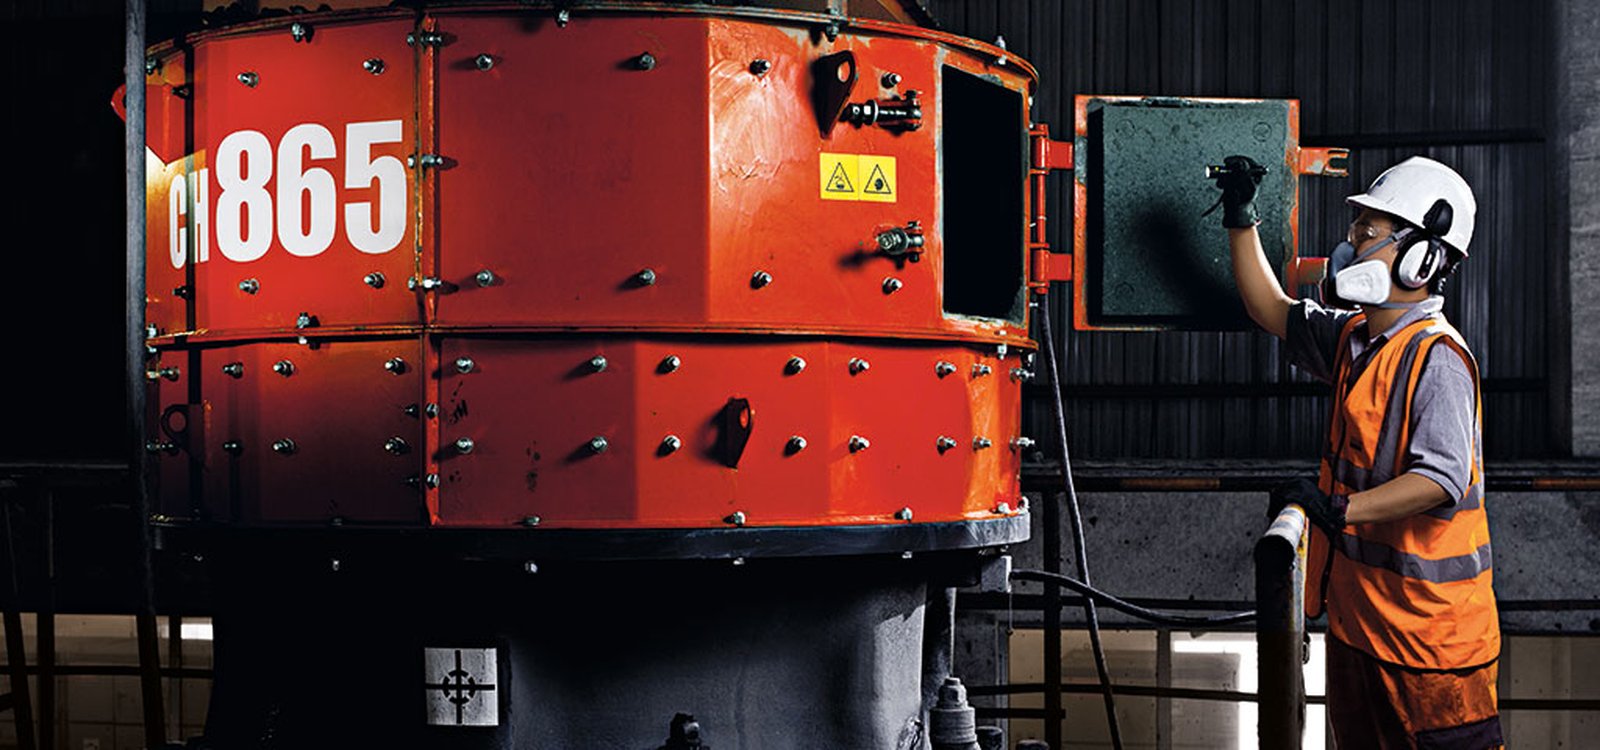 The new Sandvik CH860 and Sandvik CH865 cone crushers provide advanced solutions for secondary and tertiary crushing.